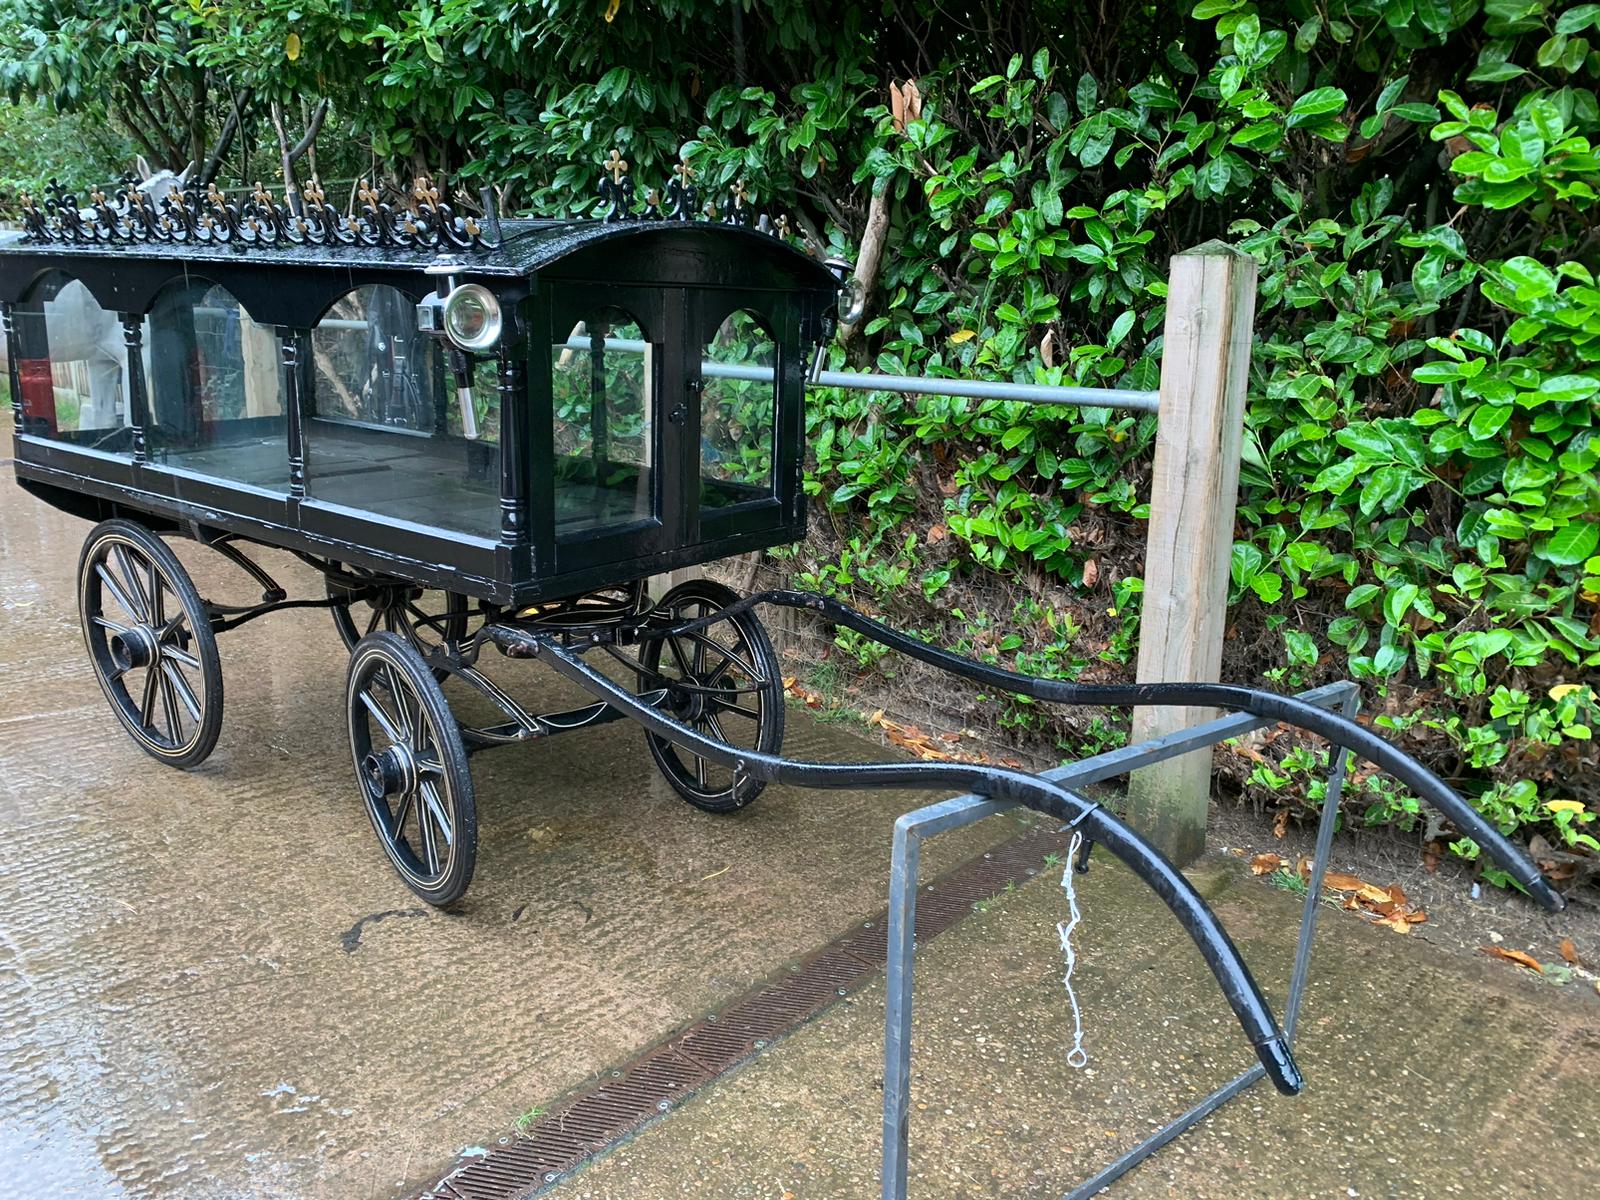 PONY HEARSE to suit 12hh single. Painted black with the wheels lined in white. The decorative roof